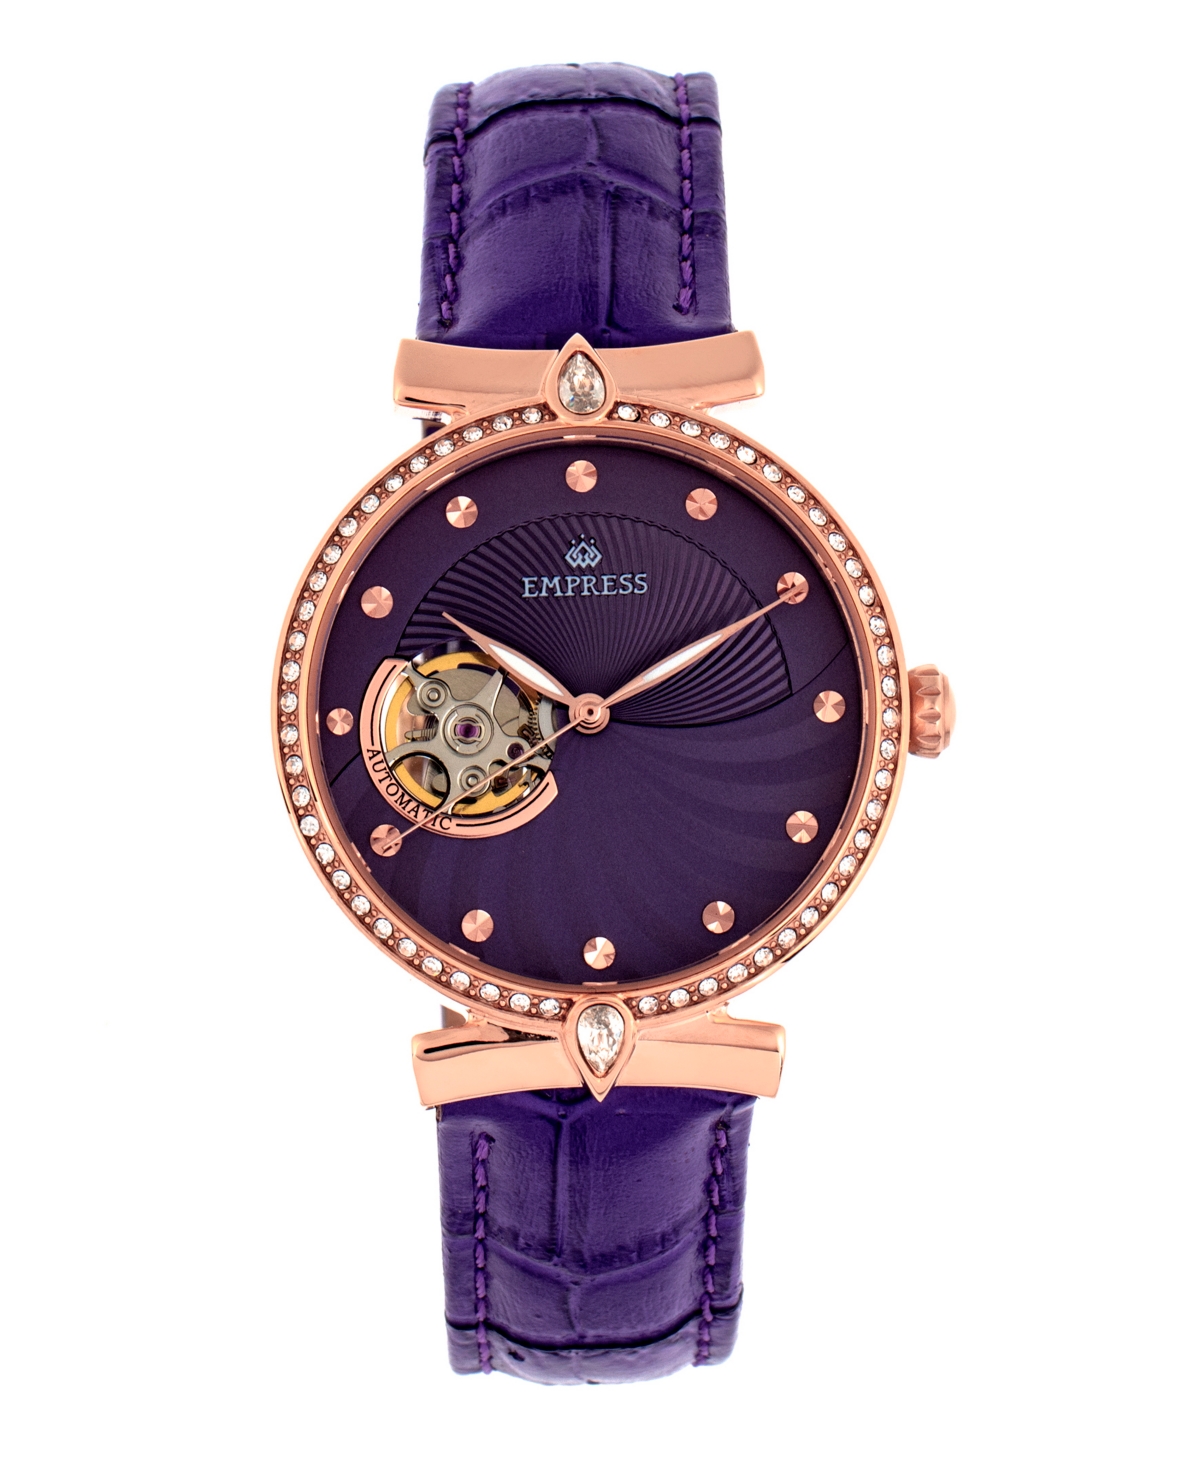 Empress Edith Semi Skeleton Black or Teal or Blue or Orange or Purple or Pink Leather Band Watch, 36mm